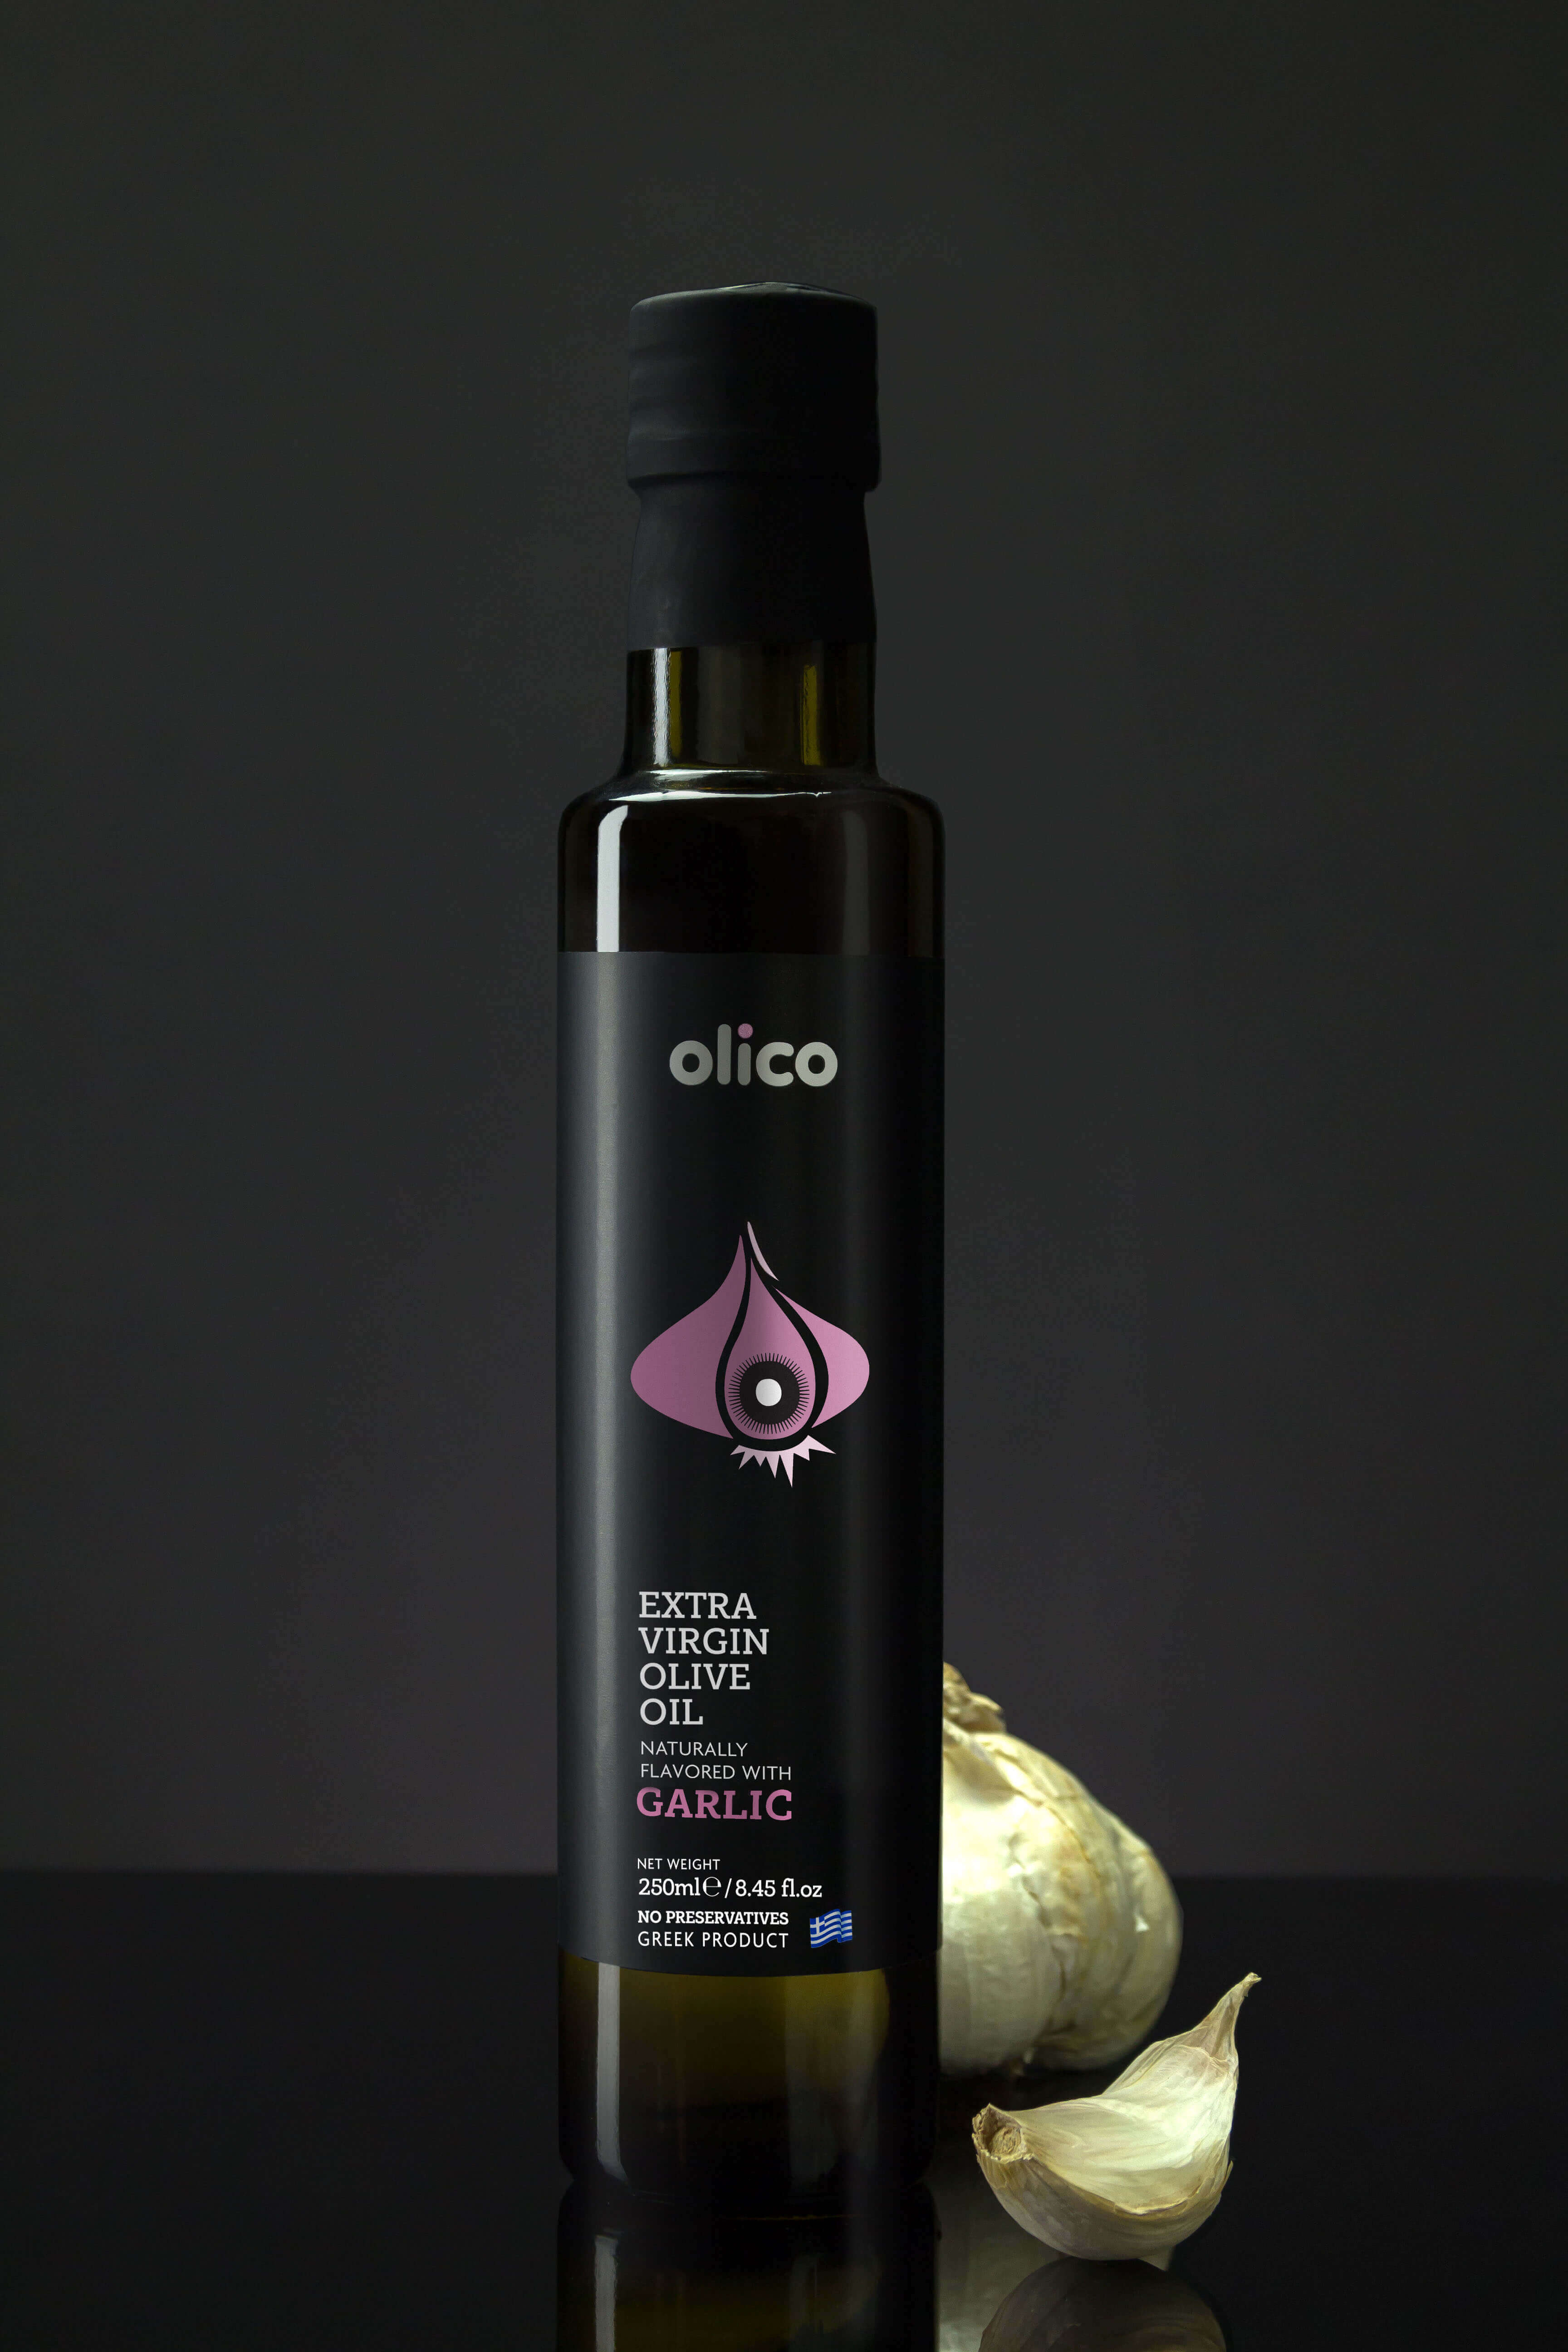 GOURMET EXTRA VIRGIN OLIVE OIL NATURALLY FLAVORED WITH GARLIC